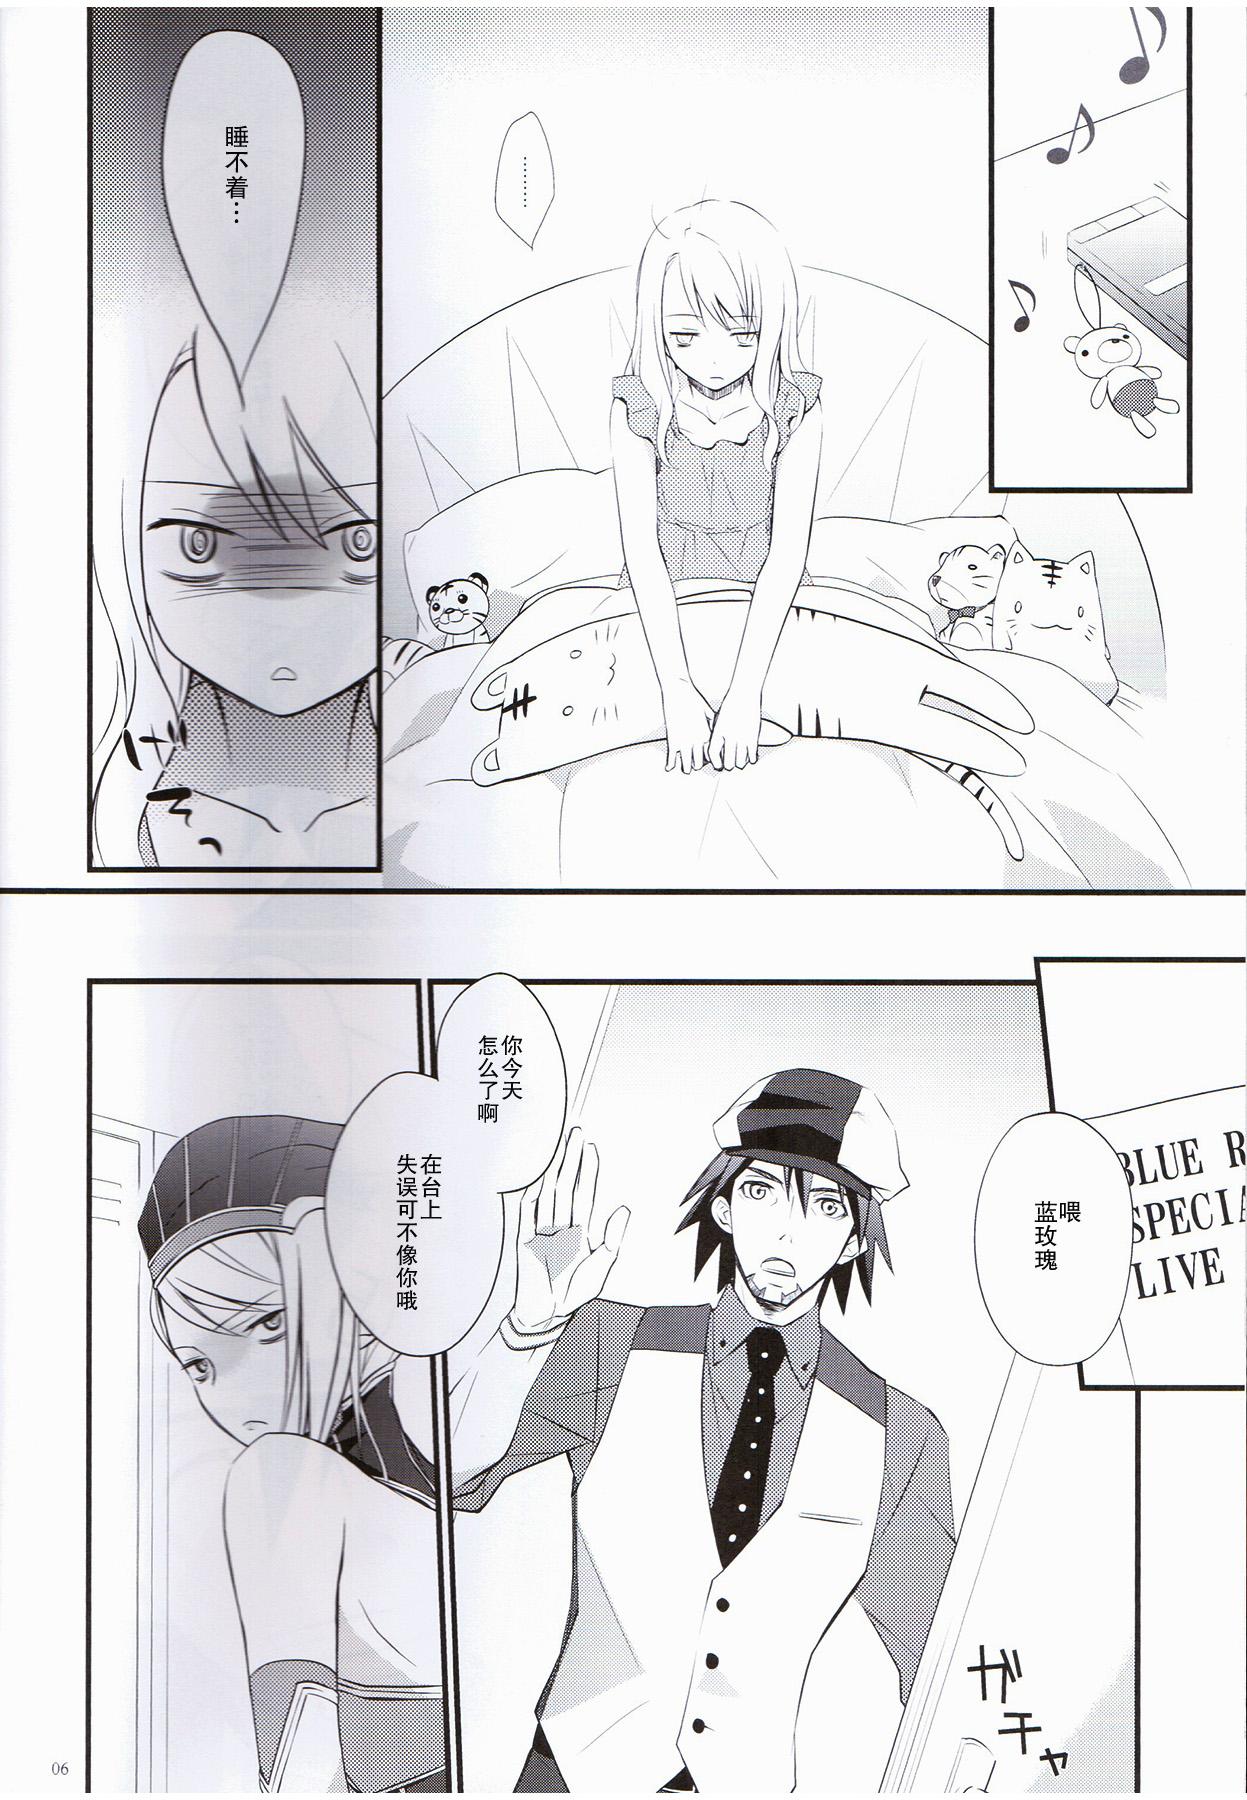 Banging Absolute Zero - Tiger and bunny Insane Porn - Page 5